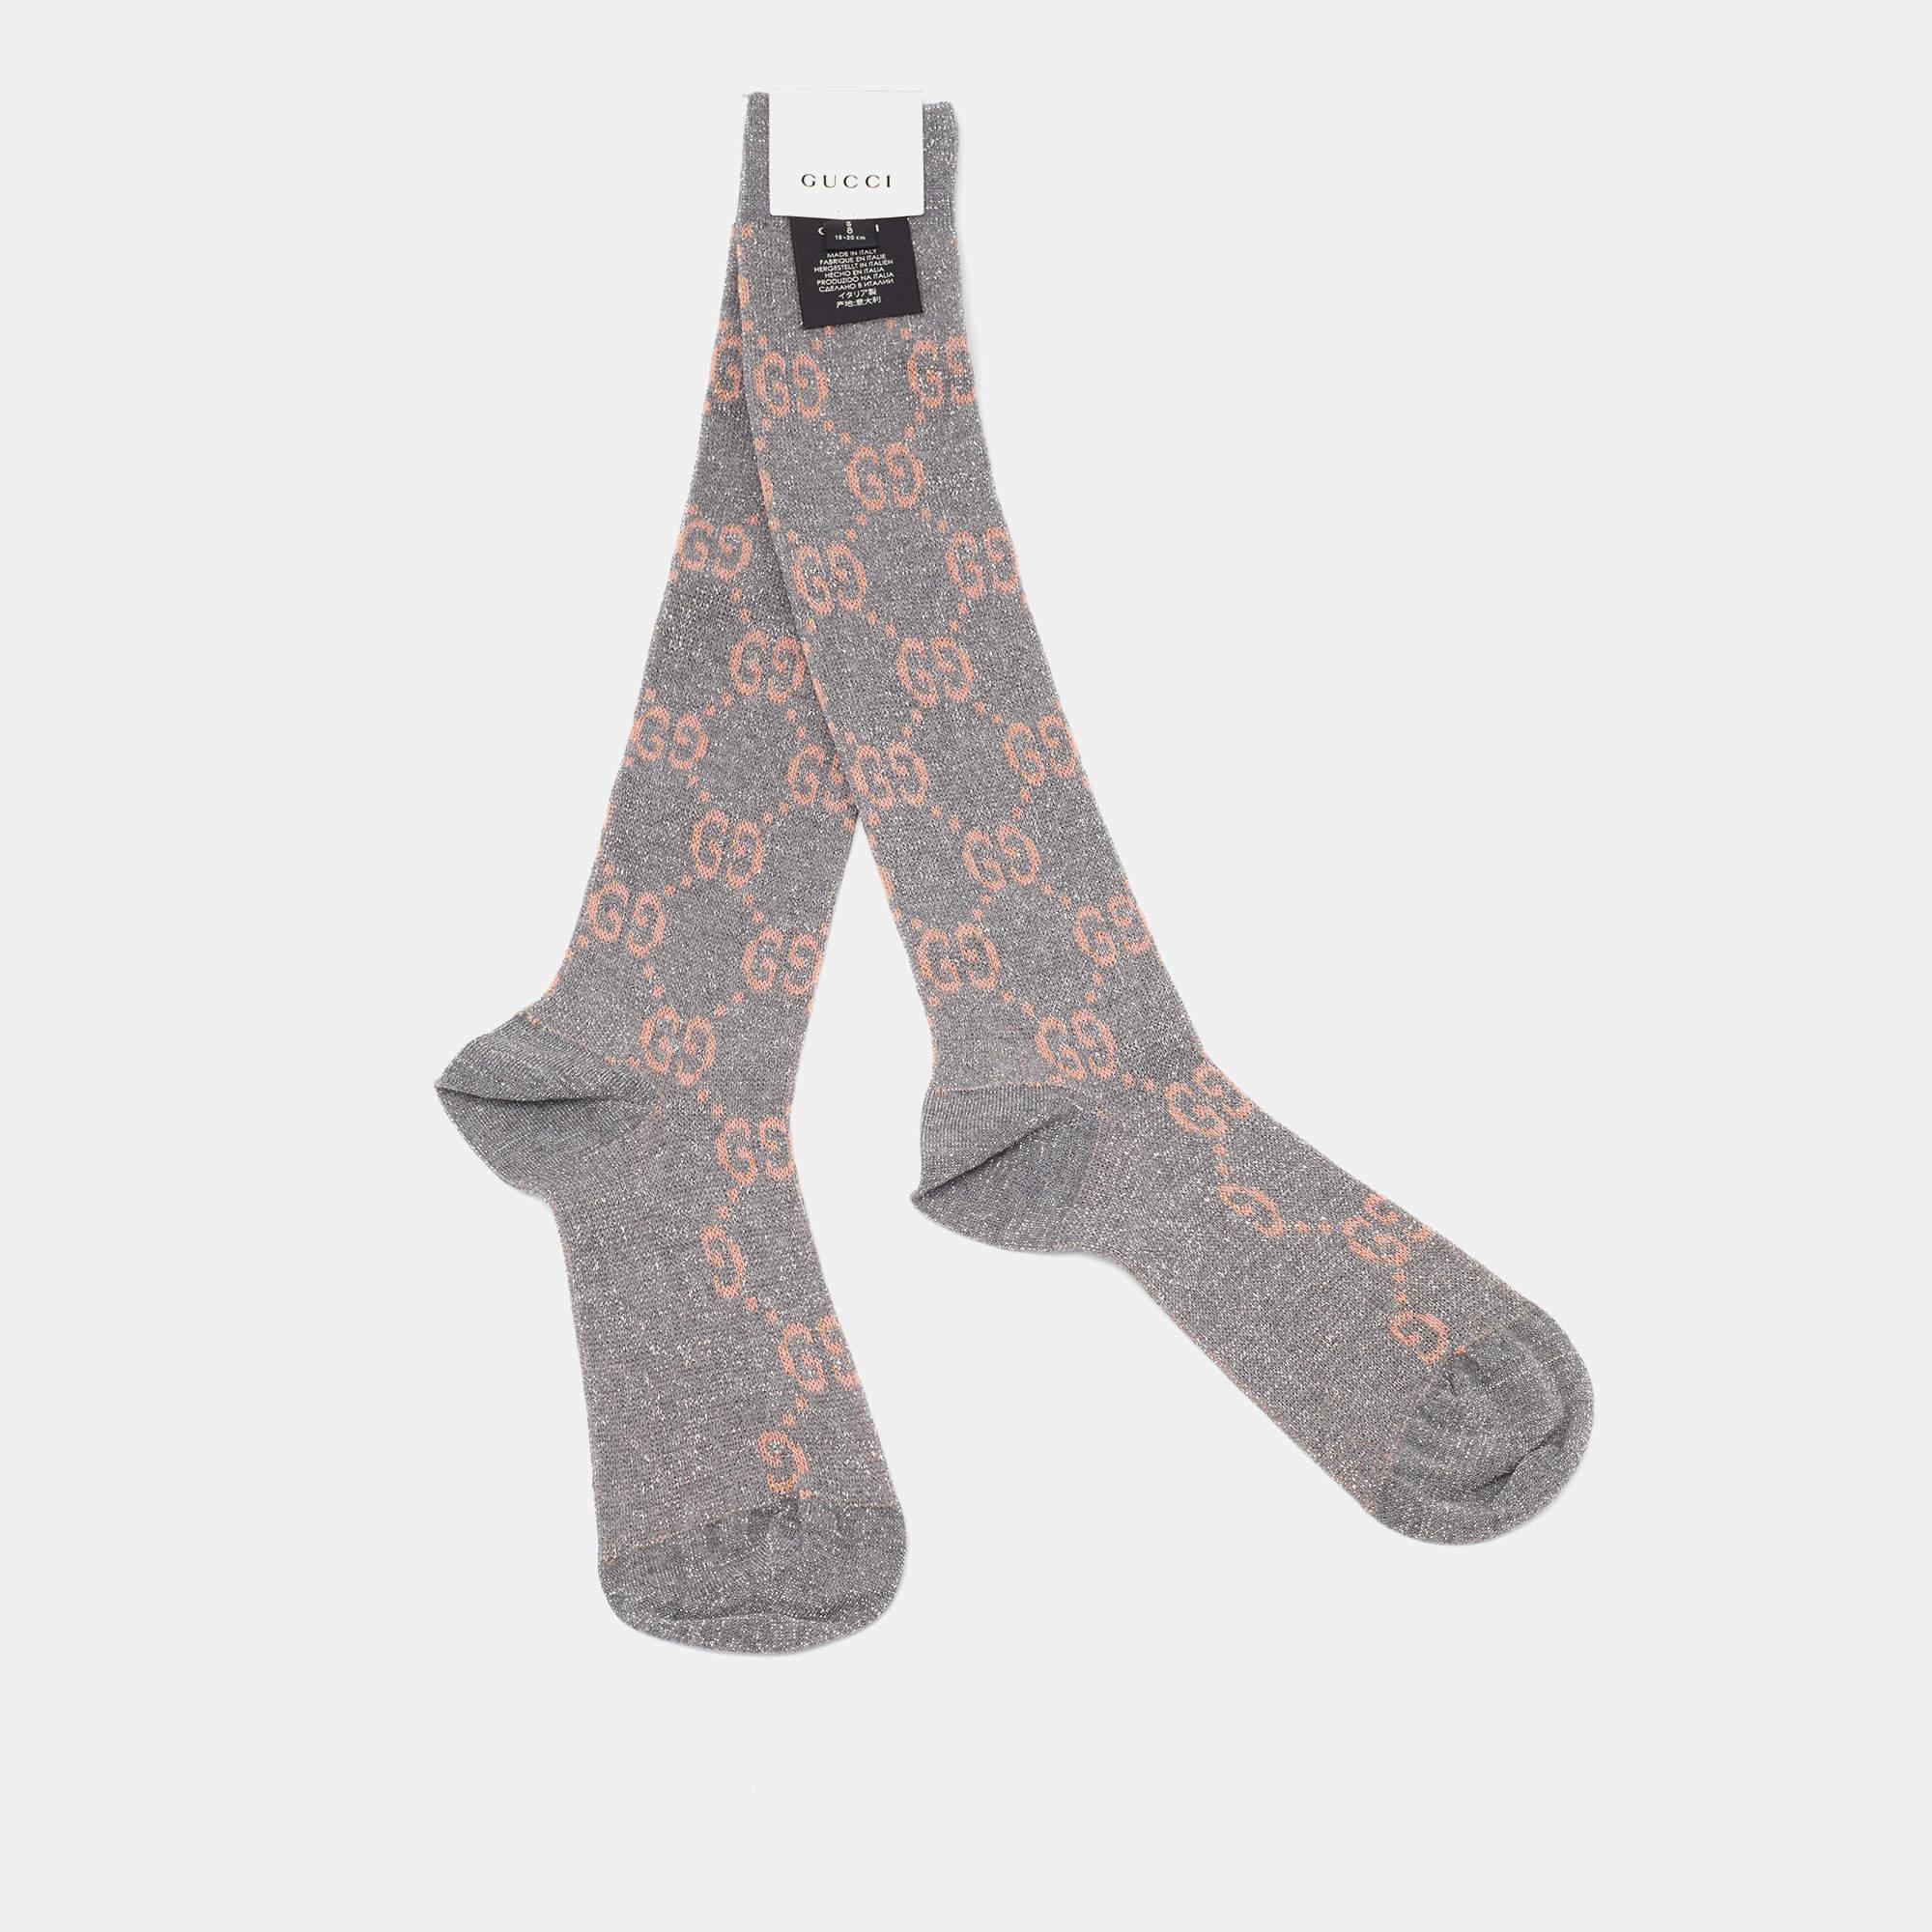 Gucci's knee-high socks feature a beige and silver logo monogram design in Lurex knit. The luxurious blend ensures comfort and style, making them a statement accessory for fashion-forward individuals.

Includes: Brand tab